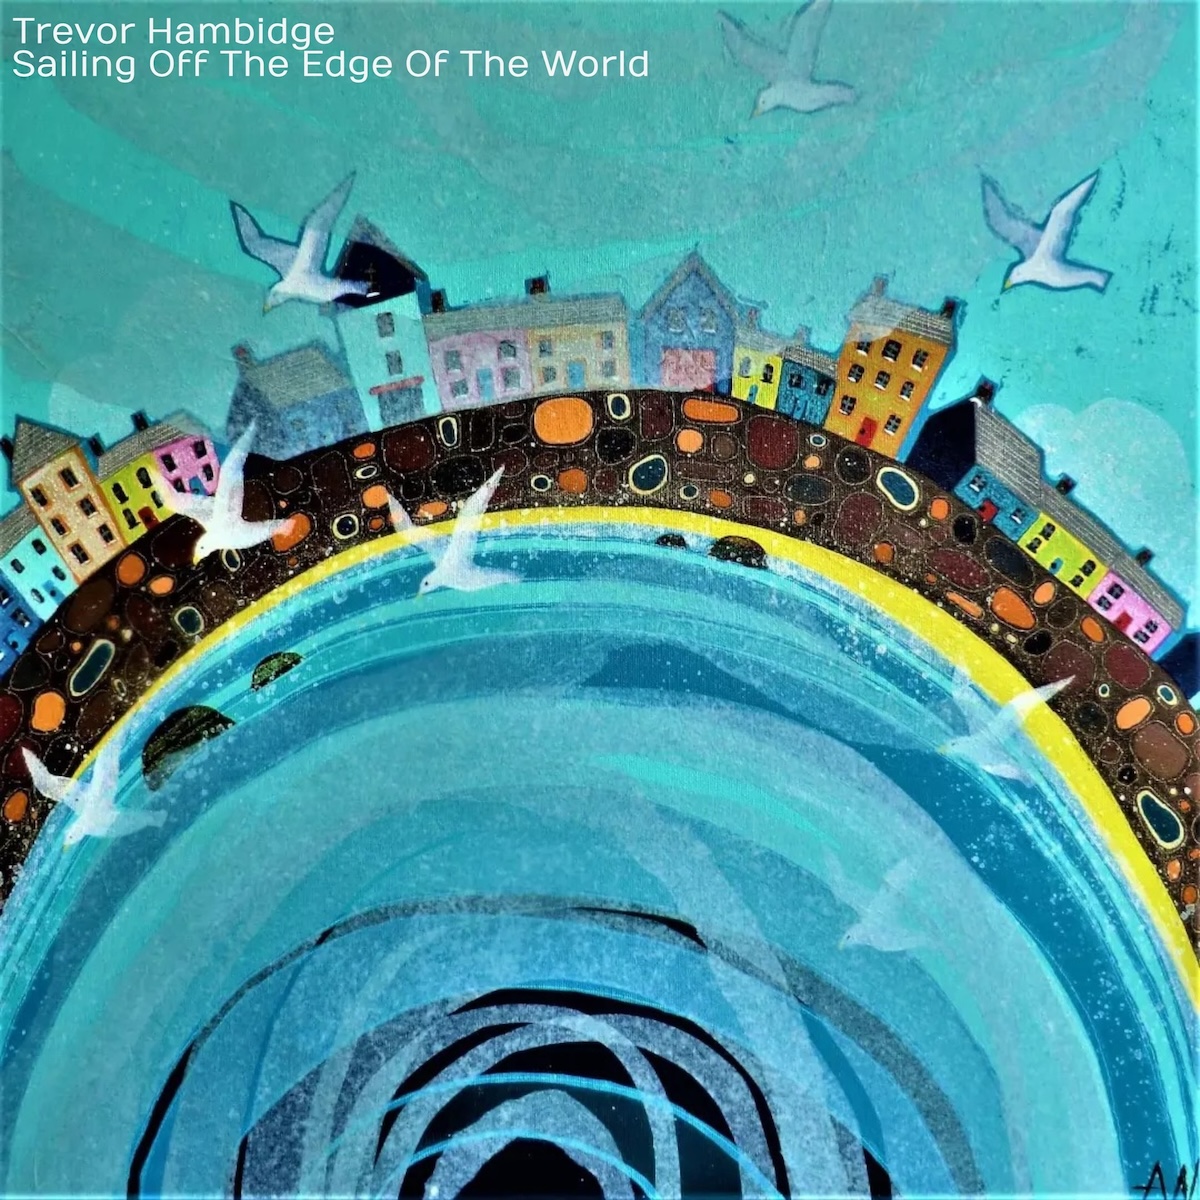 Former Beutons Frontman Trevor Hambidge Releasing Solo Single 'Sailing off the Edge of the World'